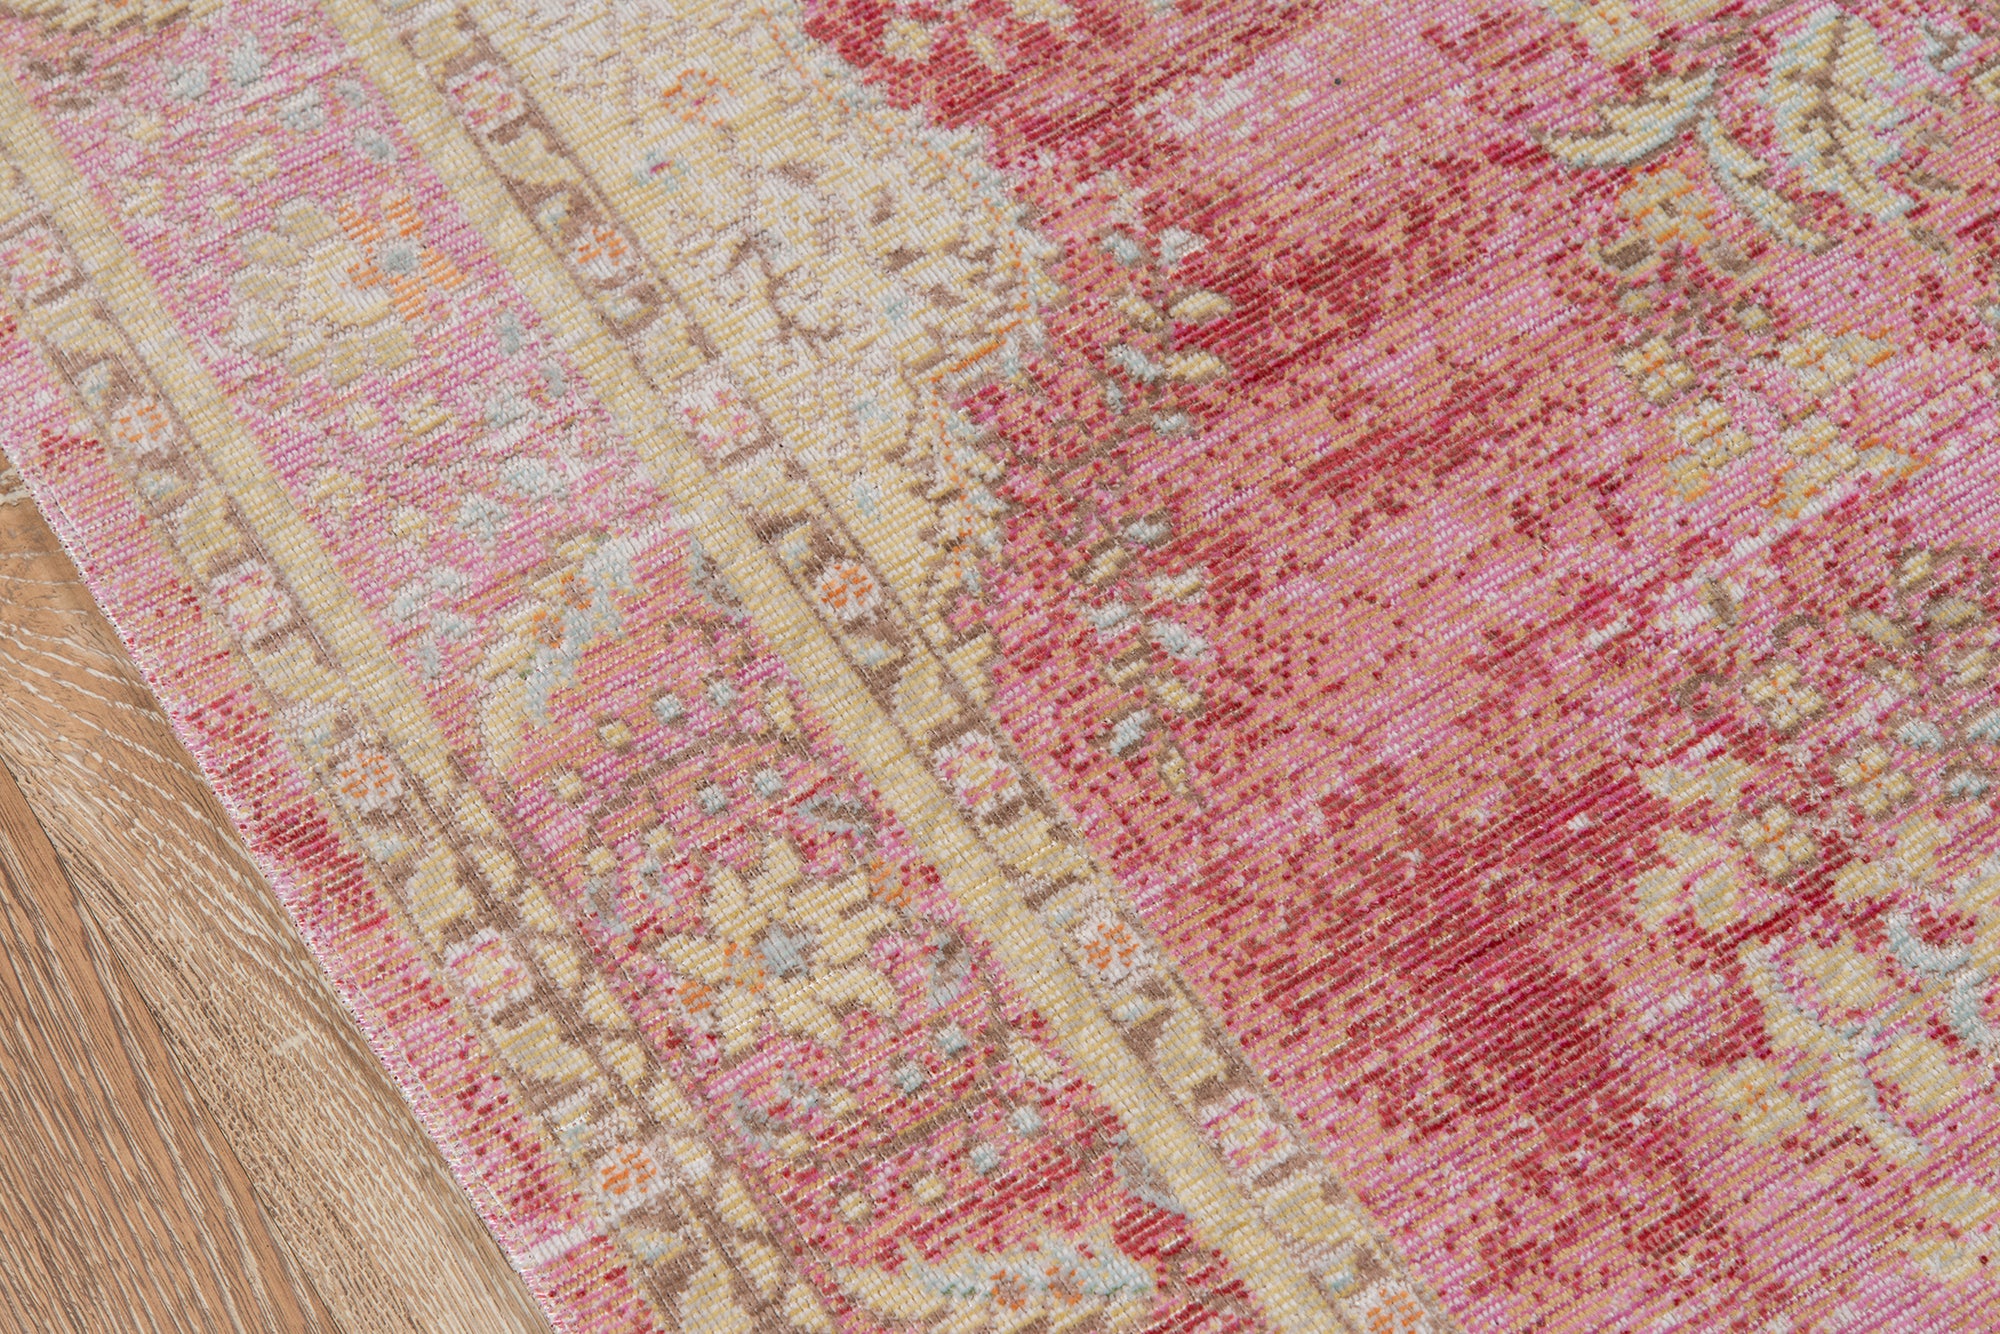 Vintage Style Faded Pink Area Rug